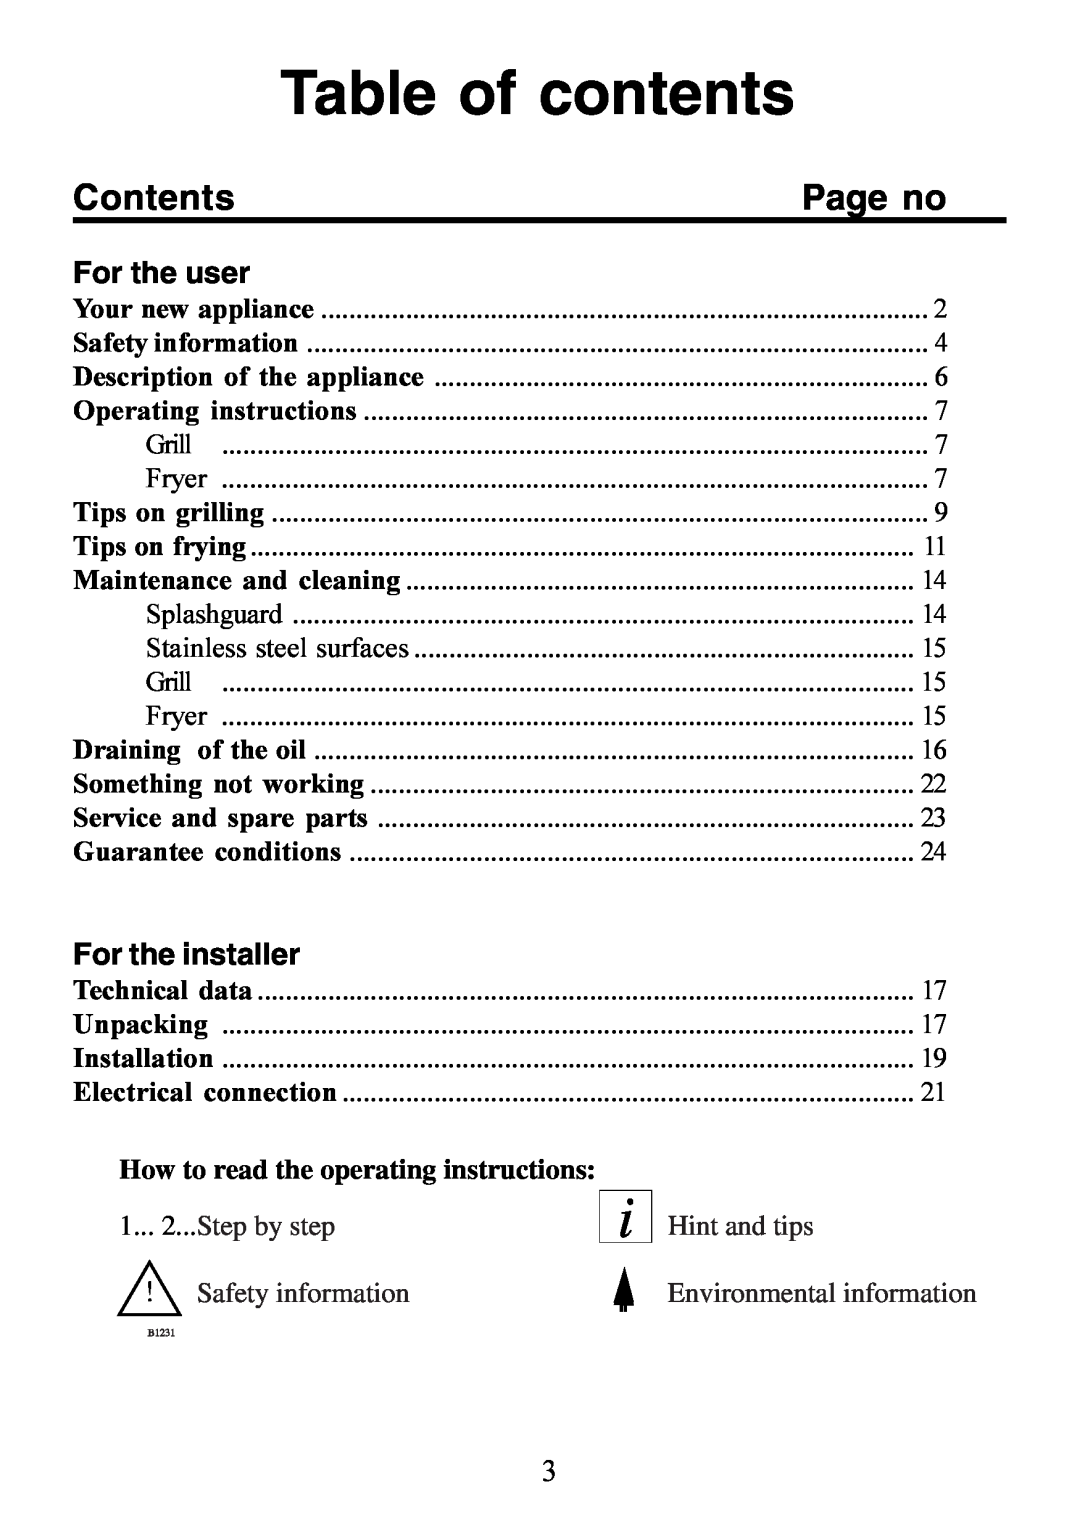 Electrolux 130 FG-m Table of contents, Contents, For the user, For the installer, How to read the operating instructions 